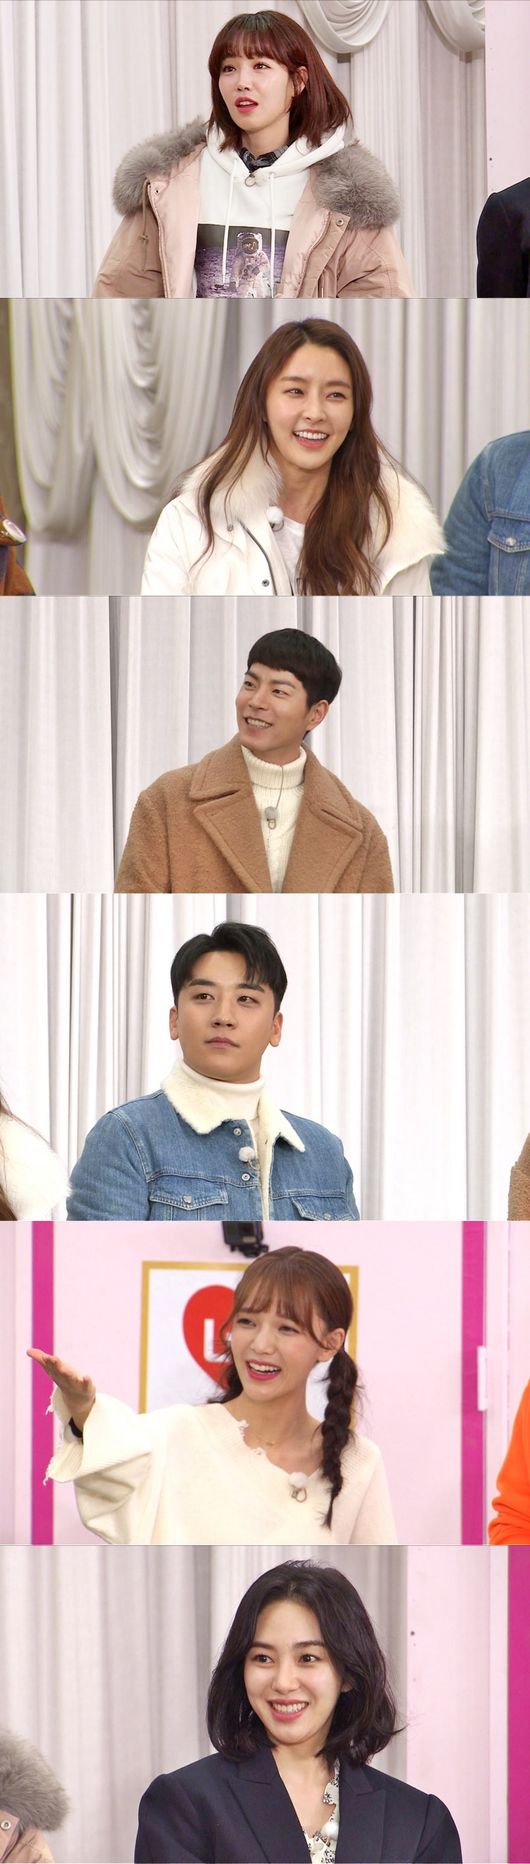 Six victorious guests will appear on Running Man.Lee Yoo-ri, Jung Yu-mi, Hong Jong-Hyun, Seungri, AOA Jimin and Minah will appear on SBS Running Man which will be broadcast on the 27th (Sun).On the same day, six entertainment industry victorious guests, who will decorate the United States of the Level-Up Project, which lasted for the past three weeks, will perform various activities.Lee Yoo-ri, a cute evil girl who visited Running Man again in five years, nervously nervous the members with her passion for flames, and Jung Yu-mi, who revealed that she was a Running Man listener, surprised everyone by showing her excellent adaptability despite her first appearance.On the other hand, Perfect Sculpture Man Hong Jong-Hyun caught his eye with unexpected fuss, and Entertainment Cheatki victory led the atmosphere with constant gesture.Also, AOAs Jimin X Minah laughed with an uncanny four-dimensional charm.The six armed with various charms will help the members of Running Man level up to identify the final winner.On the other hand, it is said that there was a huge anti-war secret hidden by them.The Level-Up Final Race with six incarnations of the win can be found on Running Man, which will be broadcast at 5 pm on Sunday, 27th.Running Man Provision